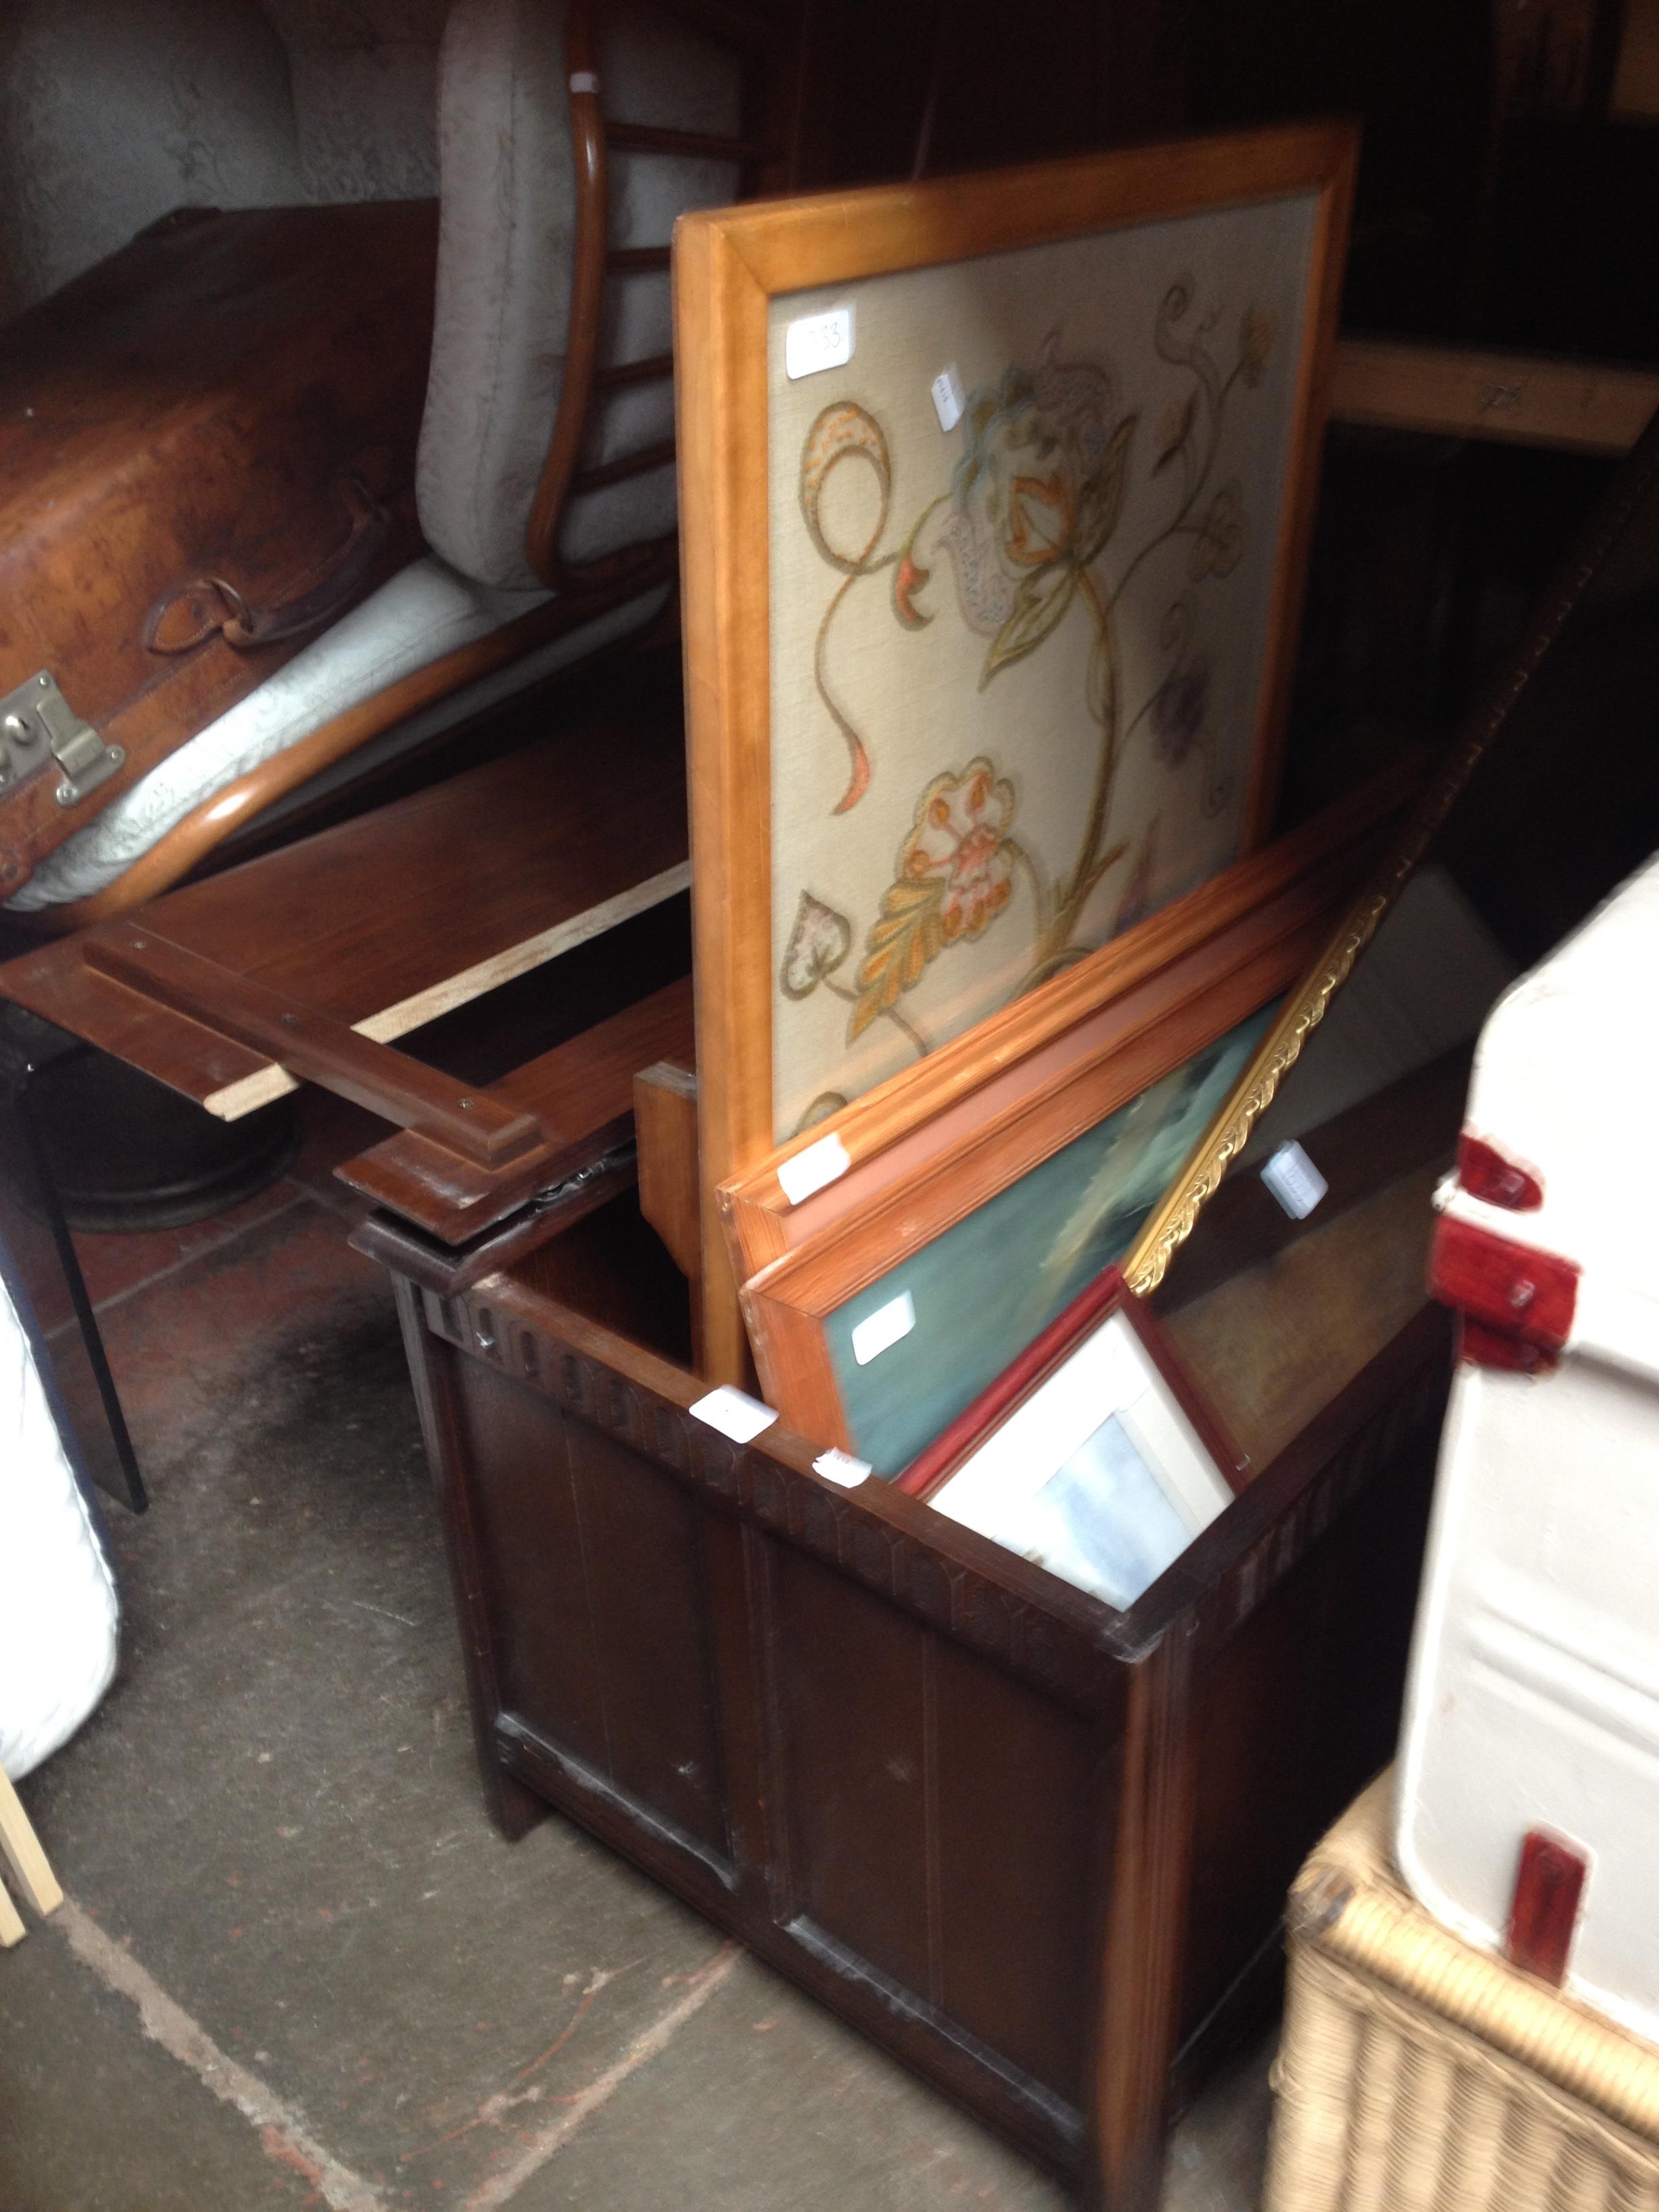 An oak bedding box containing various paintings, a mirror and a needlework firescreen/table.